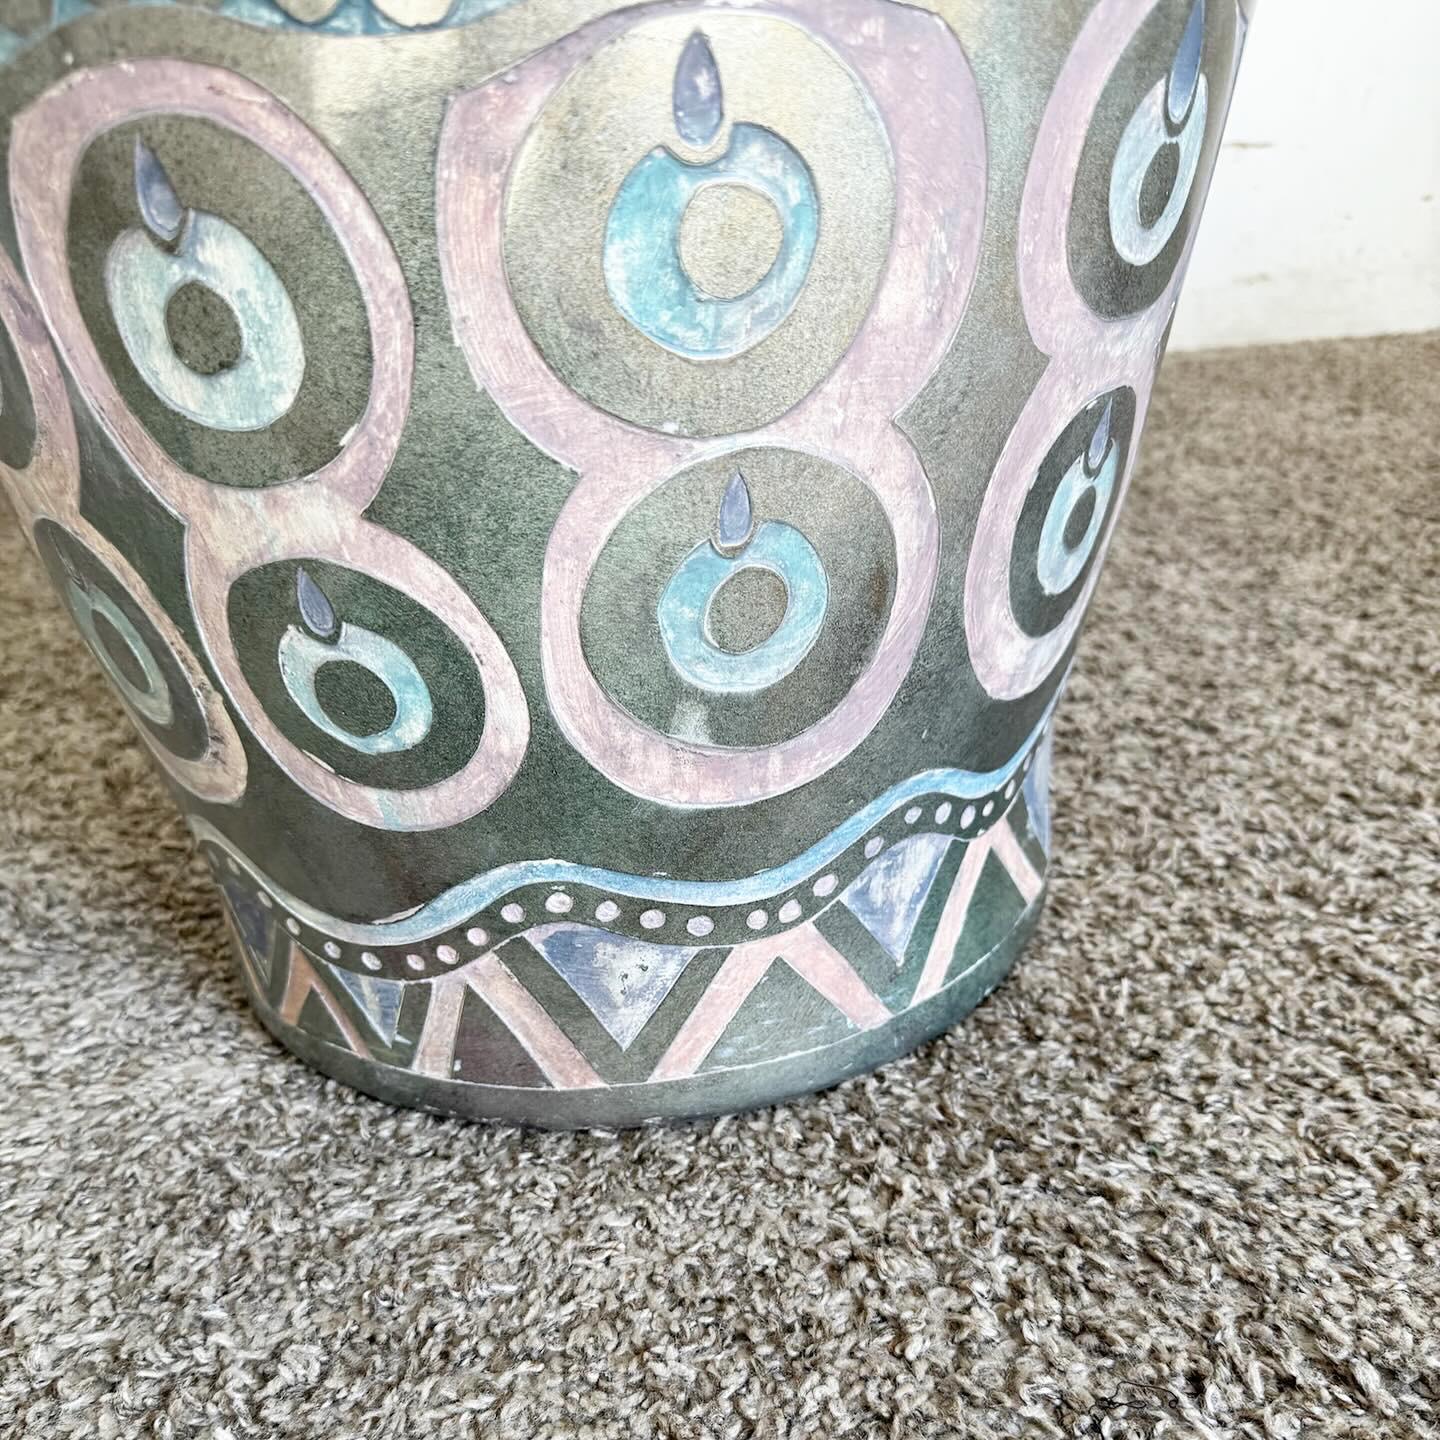 Elevate your space with the Postmodern Hand Painted and Carved Large Floor Vase, a true artistic statement piece. This vase showcases bold colors and abstract designs typical of the postmodern era, with hand-carved details adding texture and depth.